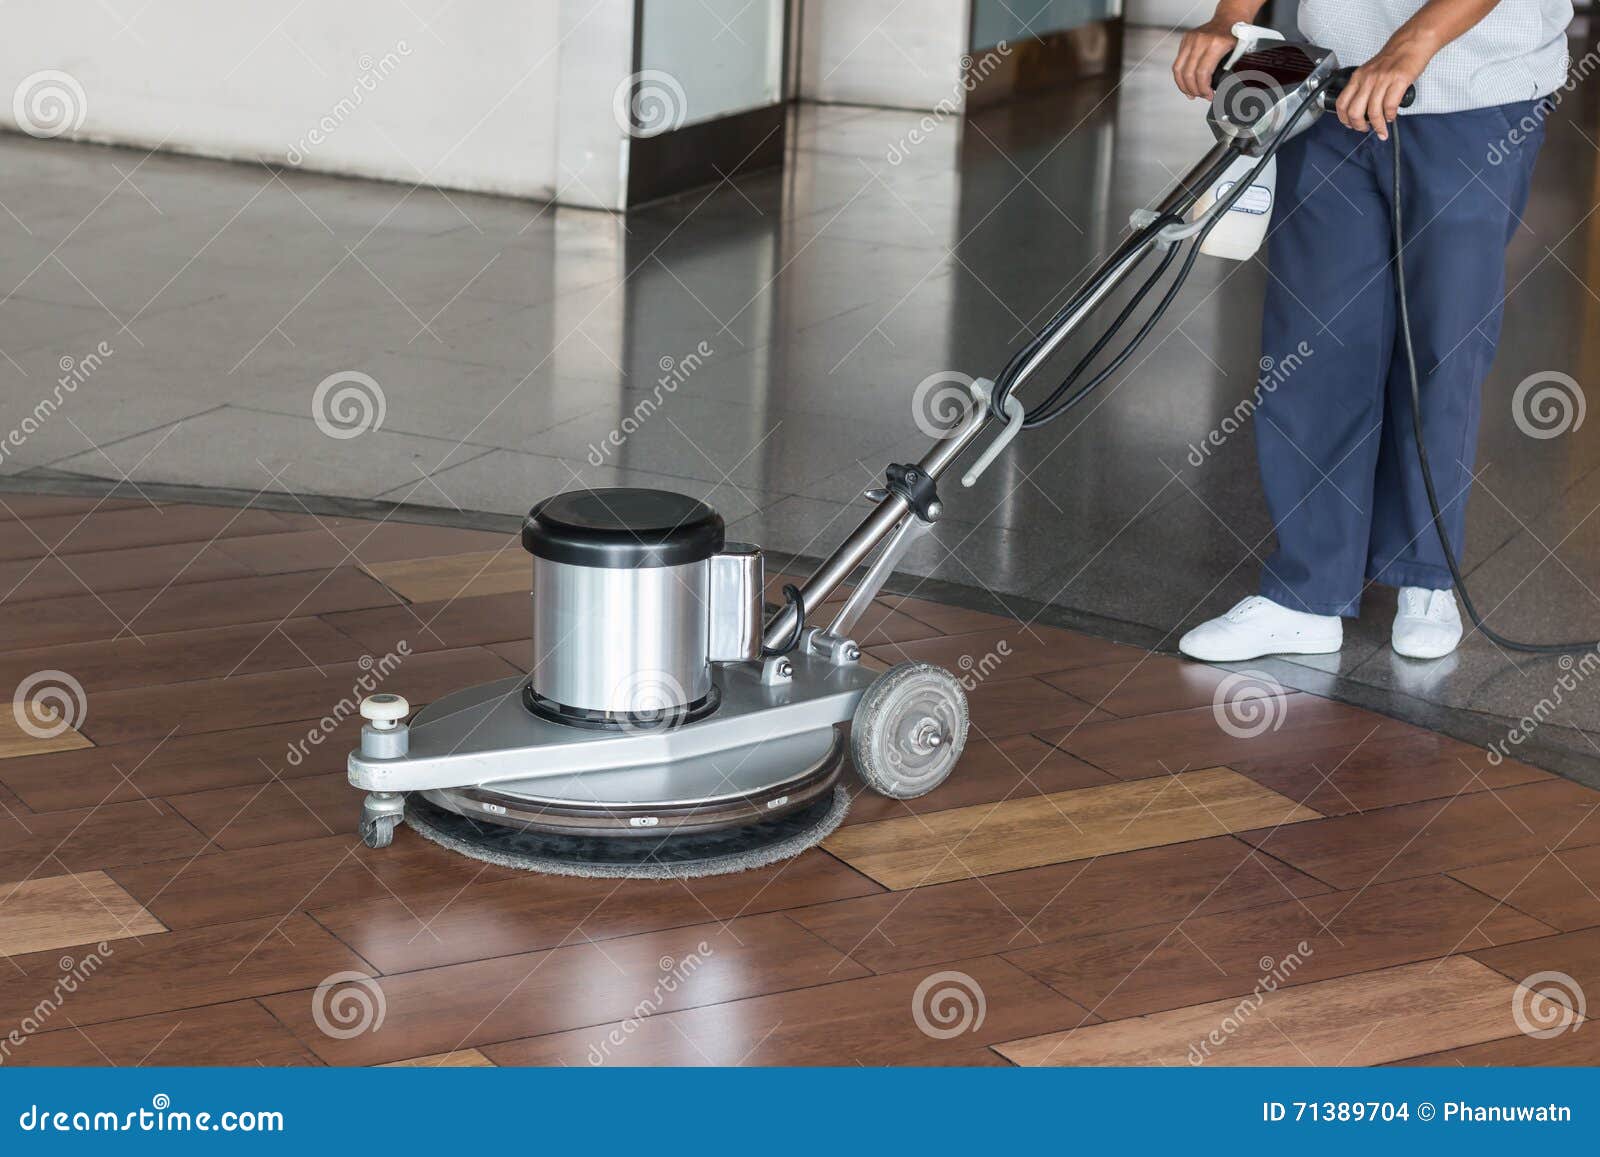 woman cleaning the floor with polishing machine